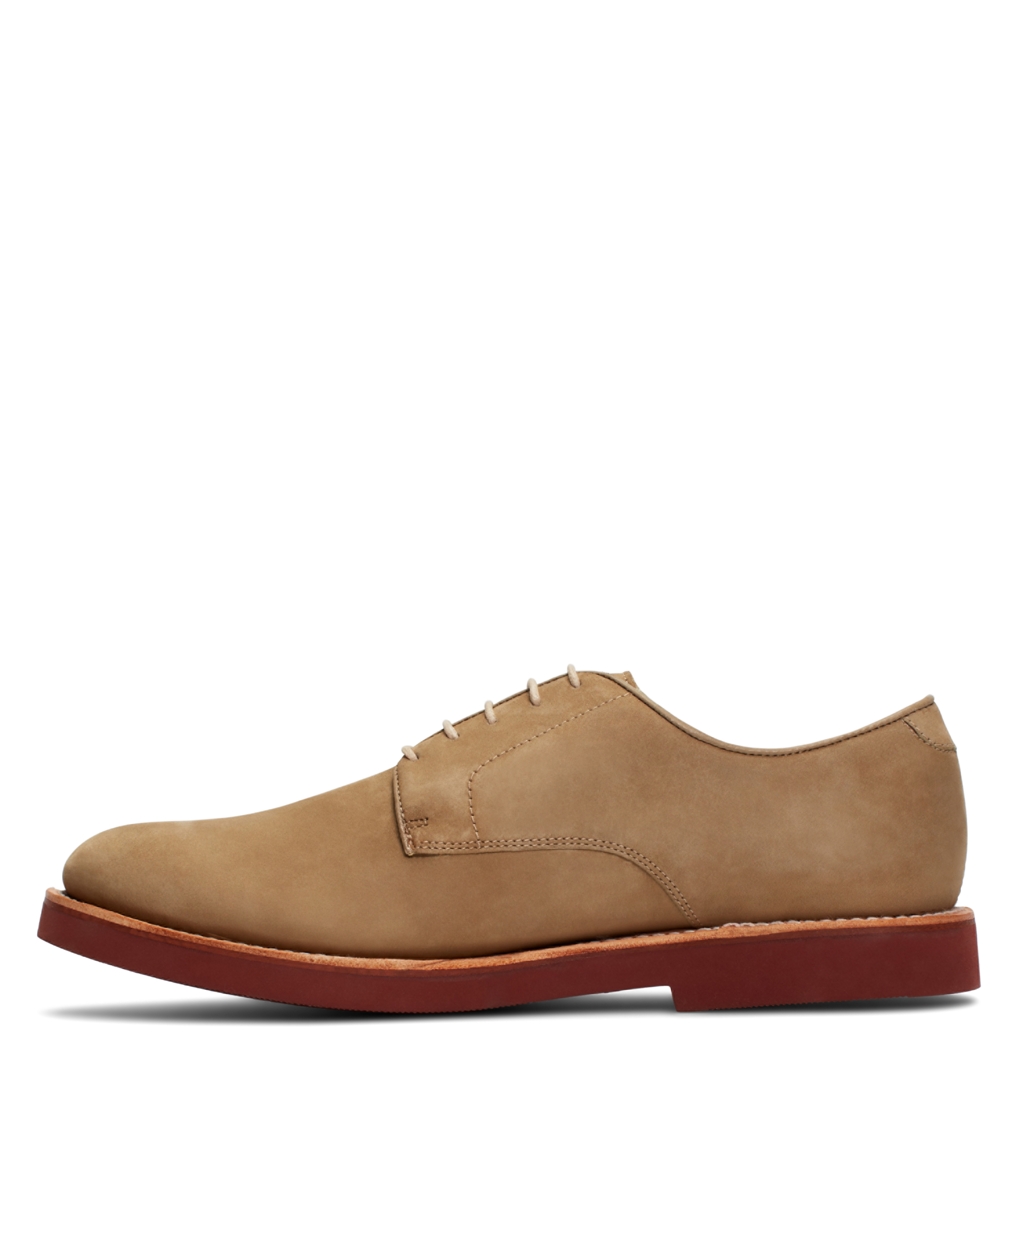 Nubuck derby shoes in seven different colors! | SOLETOPIA